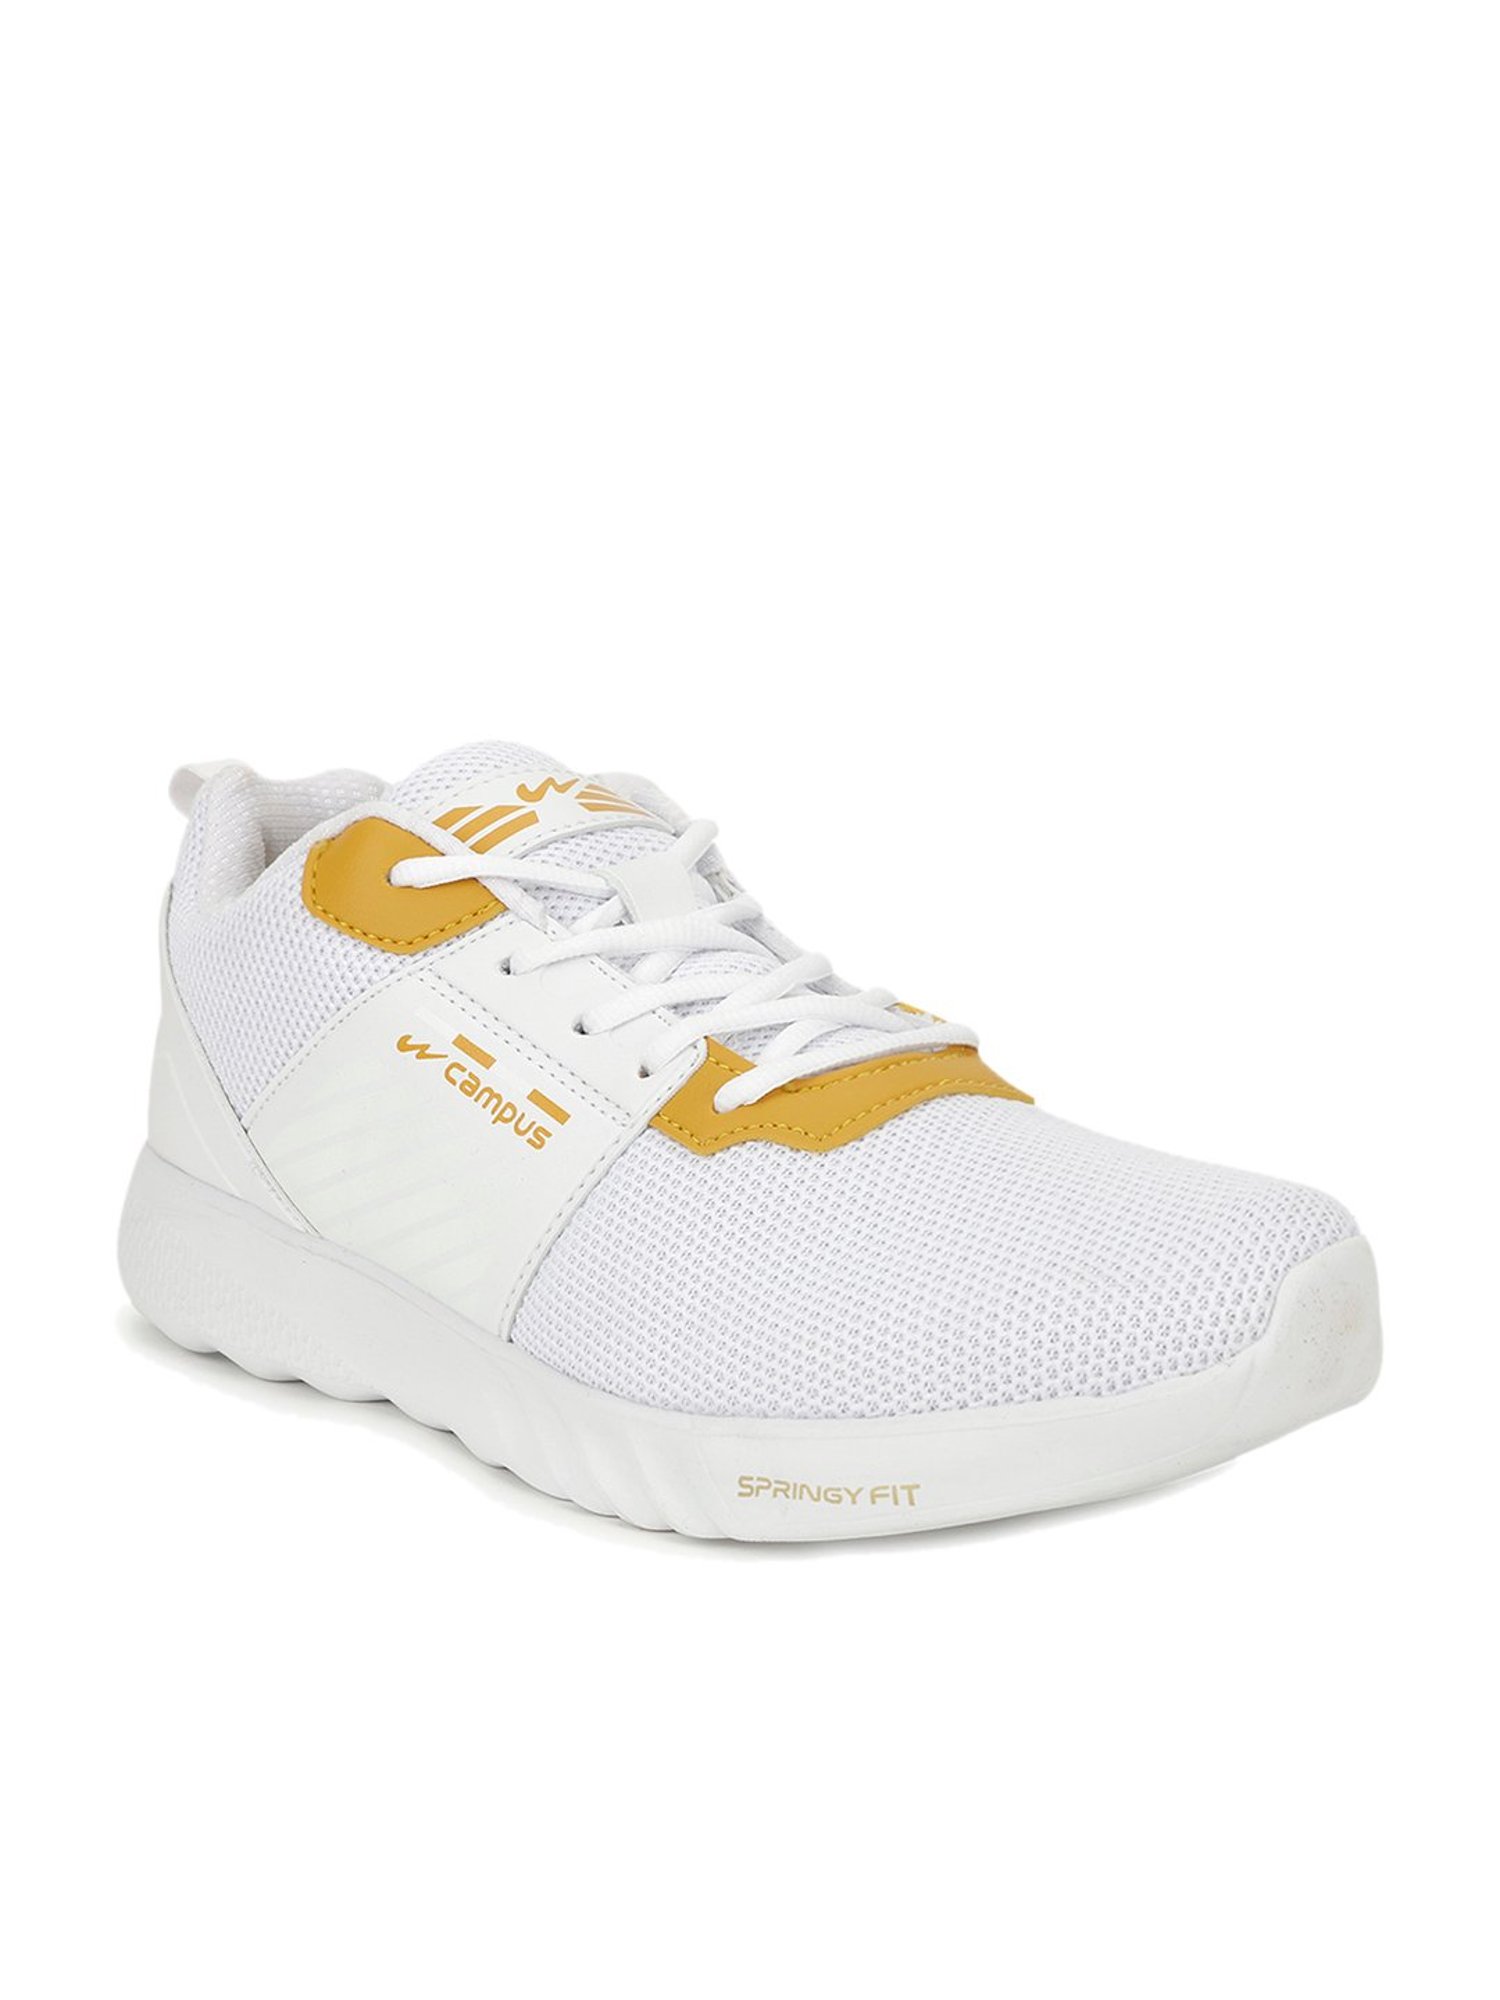 Buy Campus White Running Shoes for Men 